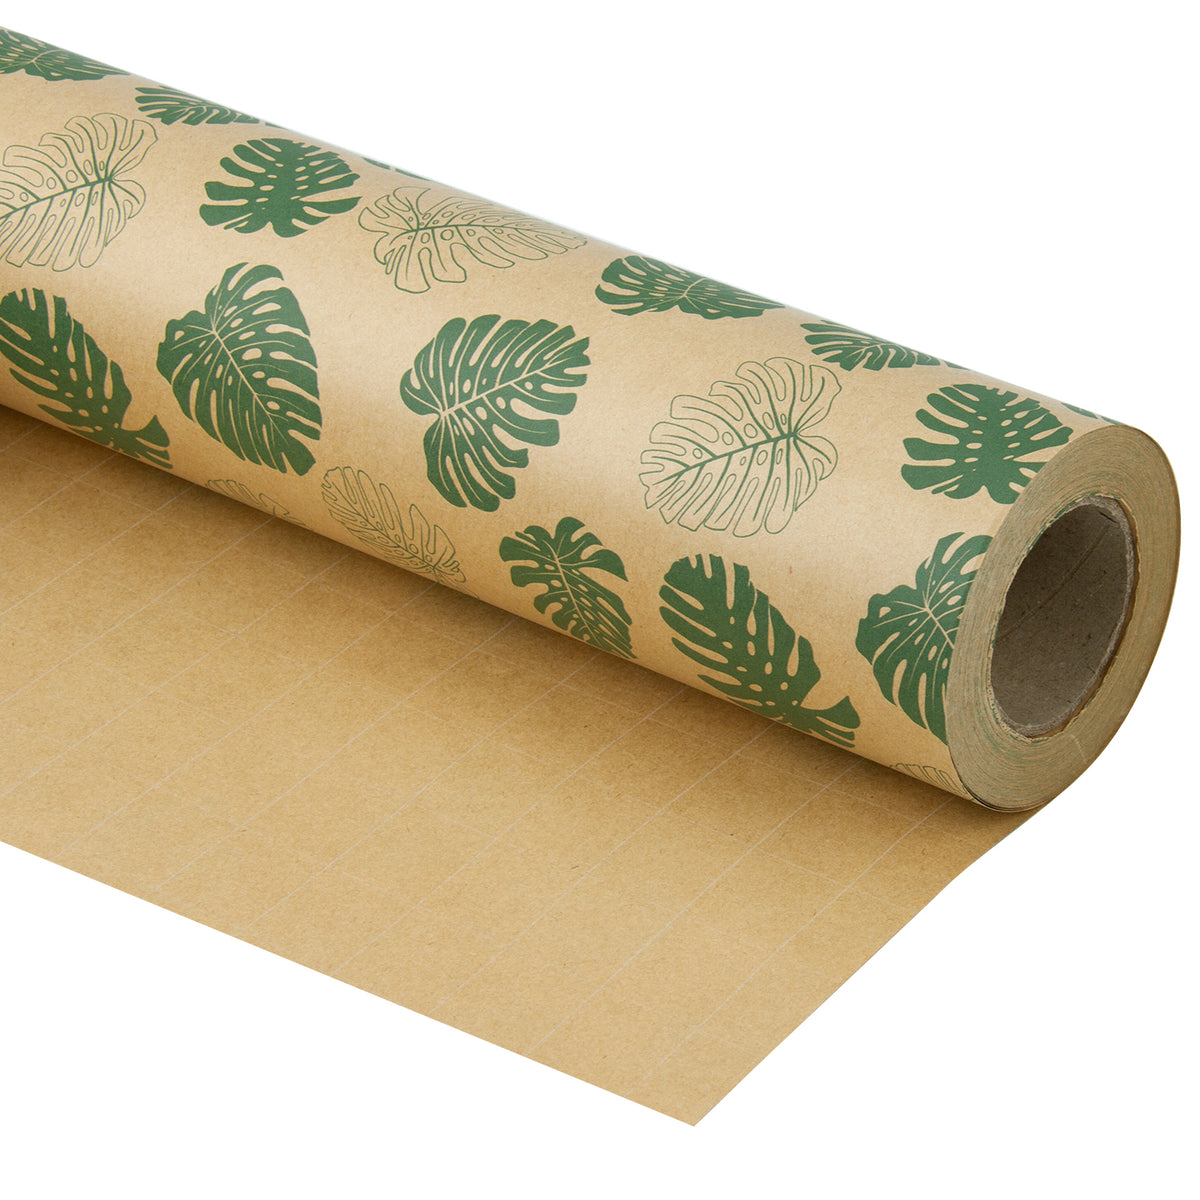 Wrapping Paper, Kraft Paper Roll for Gift Wrapping, Moving